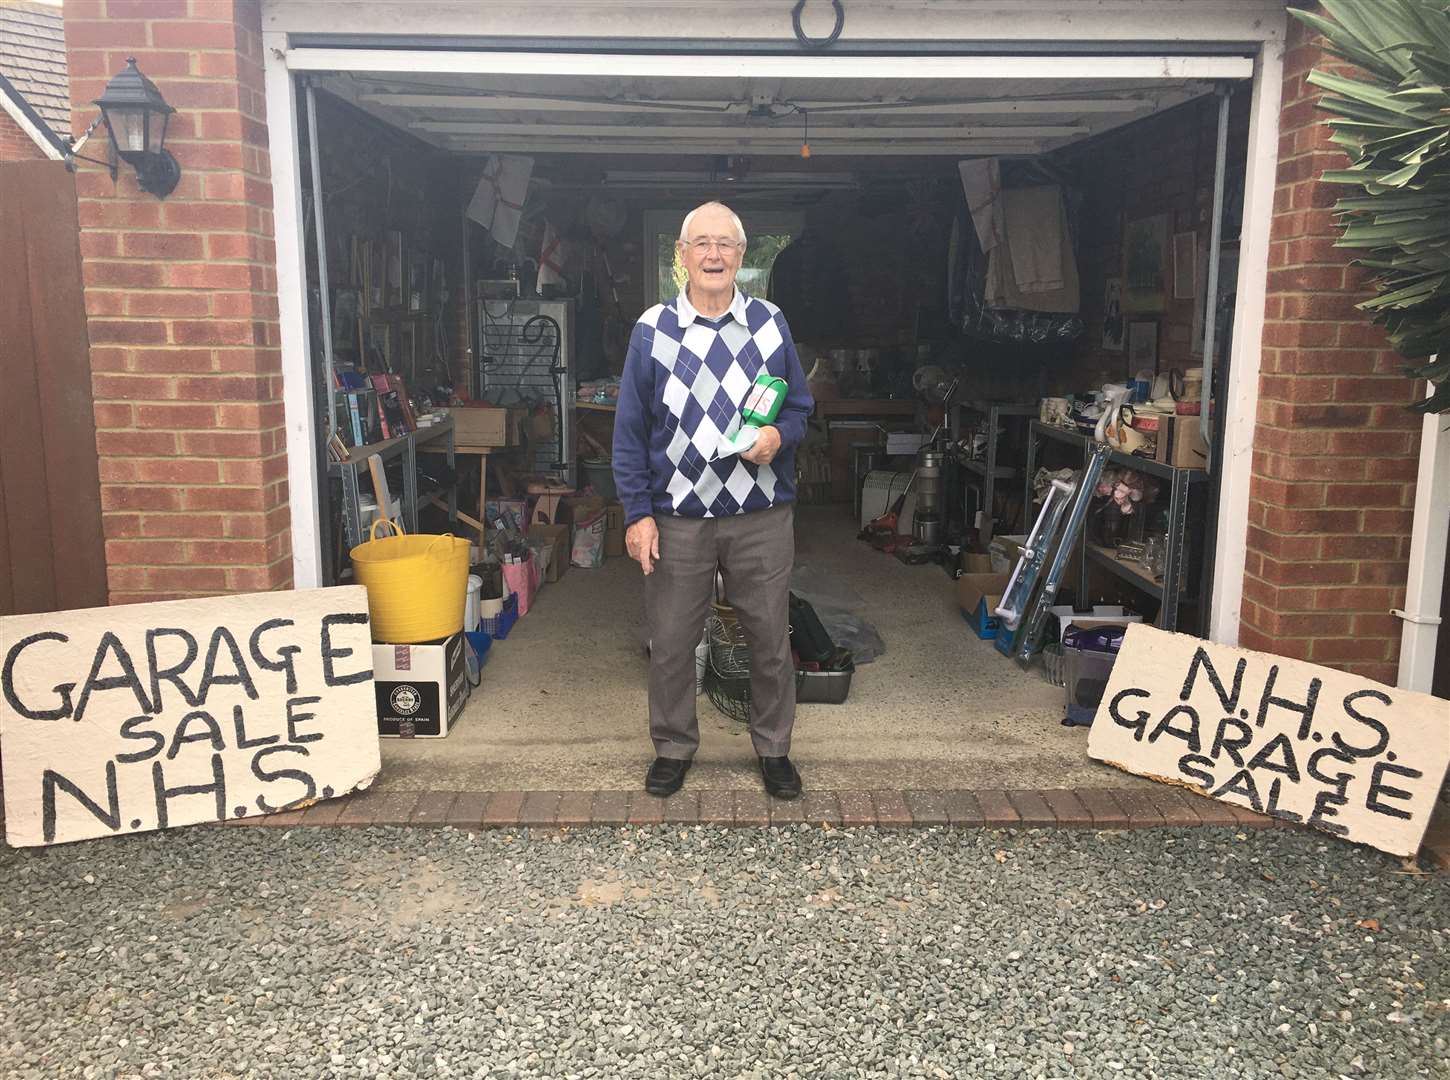 Gerry Collis has raised £2,000 for the NHS through his garage sales. Picture: East Kent Hospitals Trust